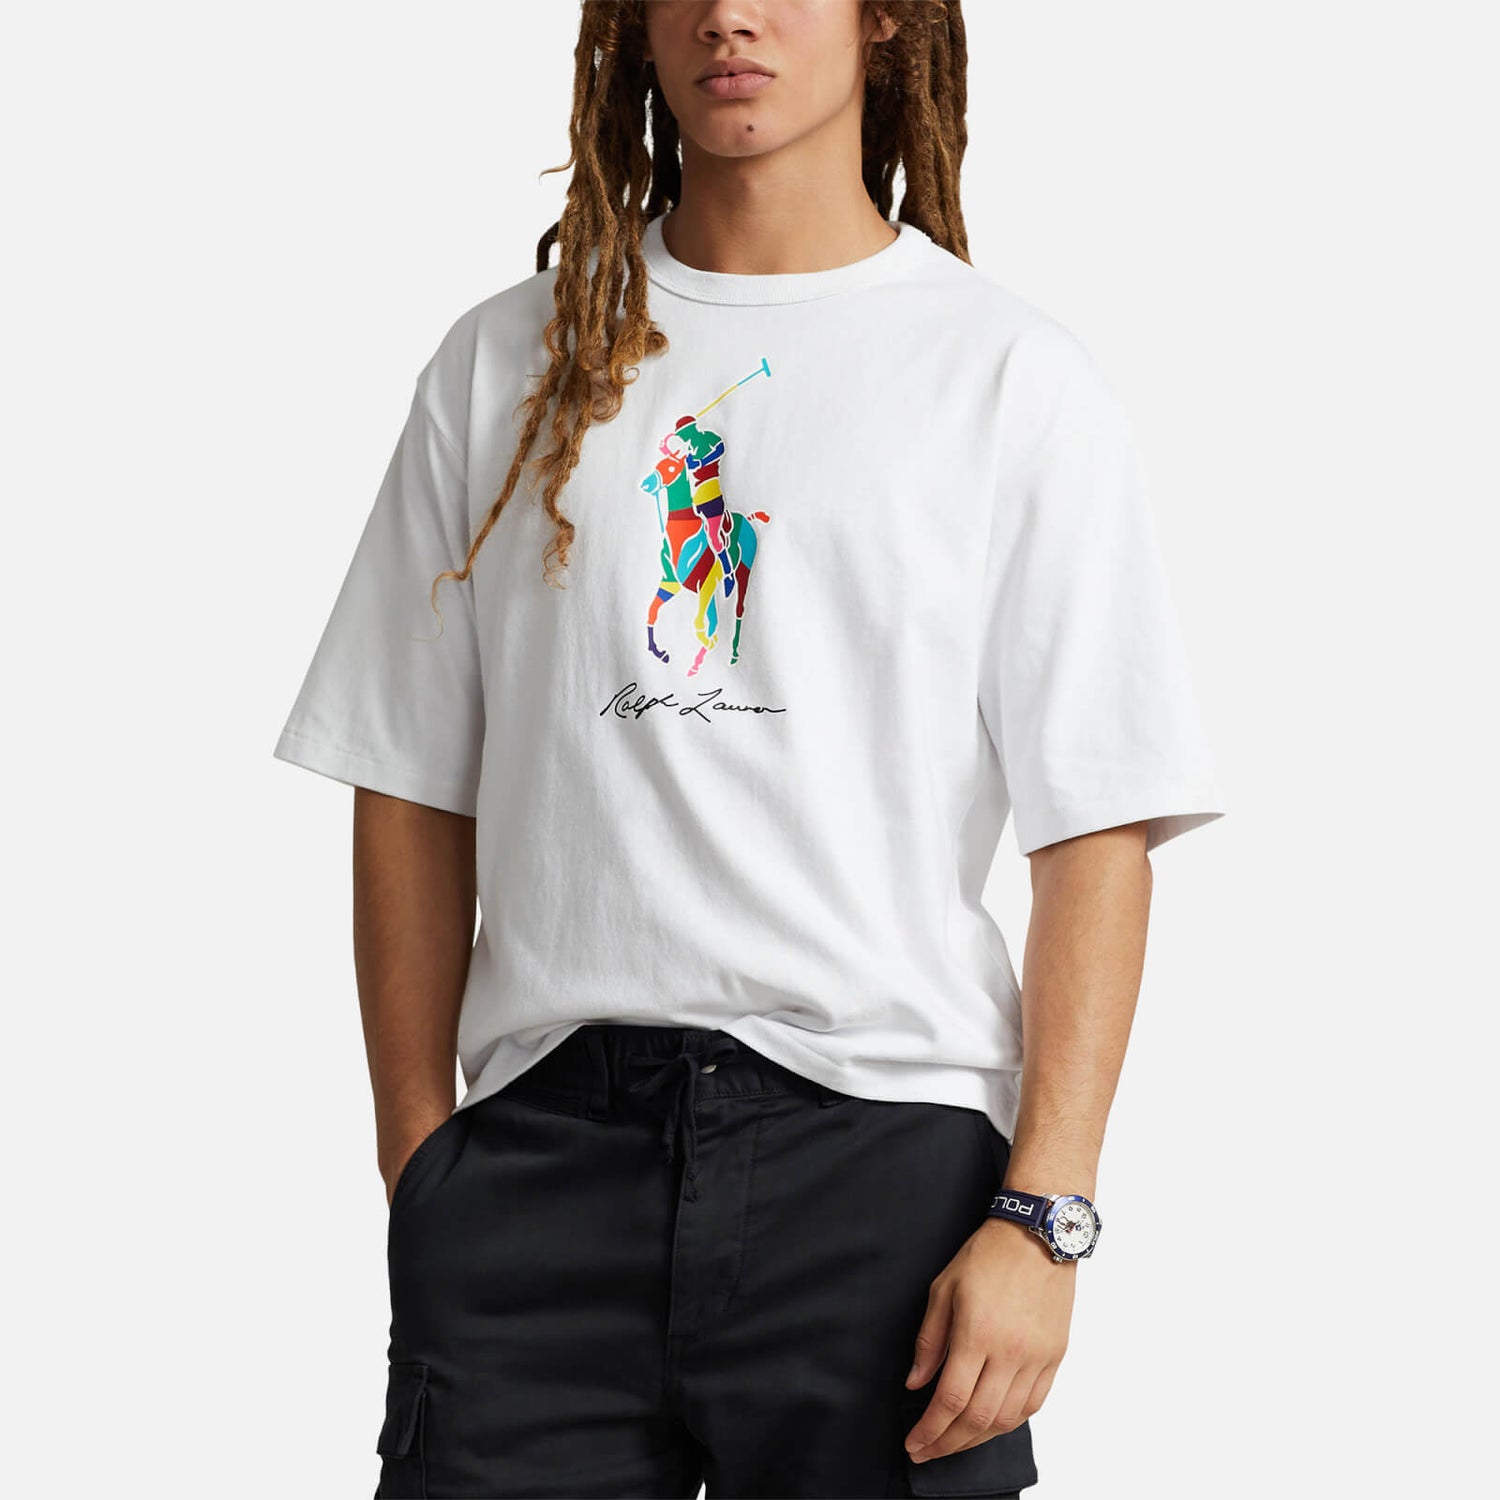 Polo Ralph Lauren Relaxed-Fit Jersey-T-Shirt mit Big Pony - White - S